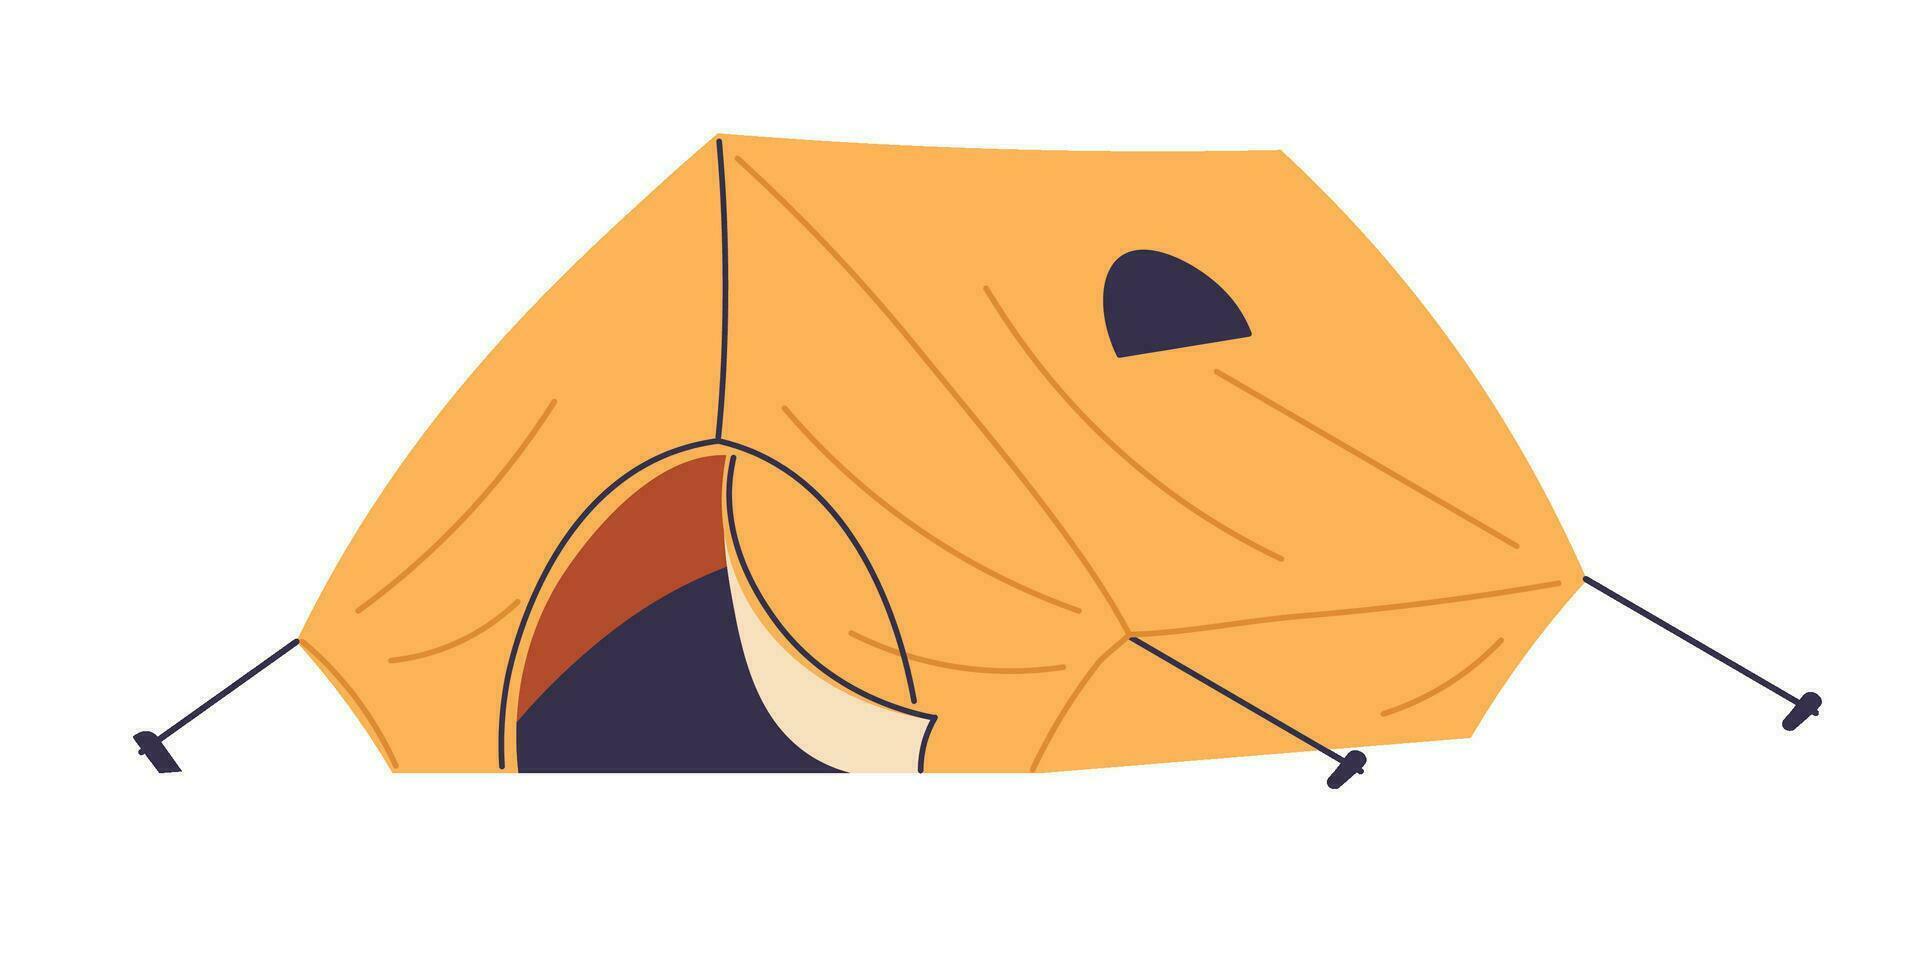 Tent for camping and traveling, summer vacation vector